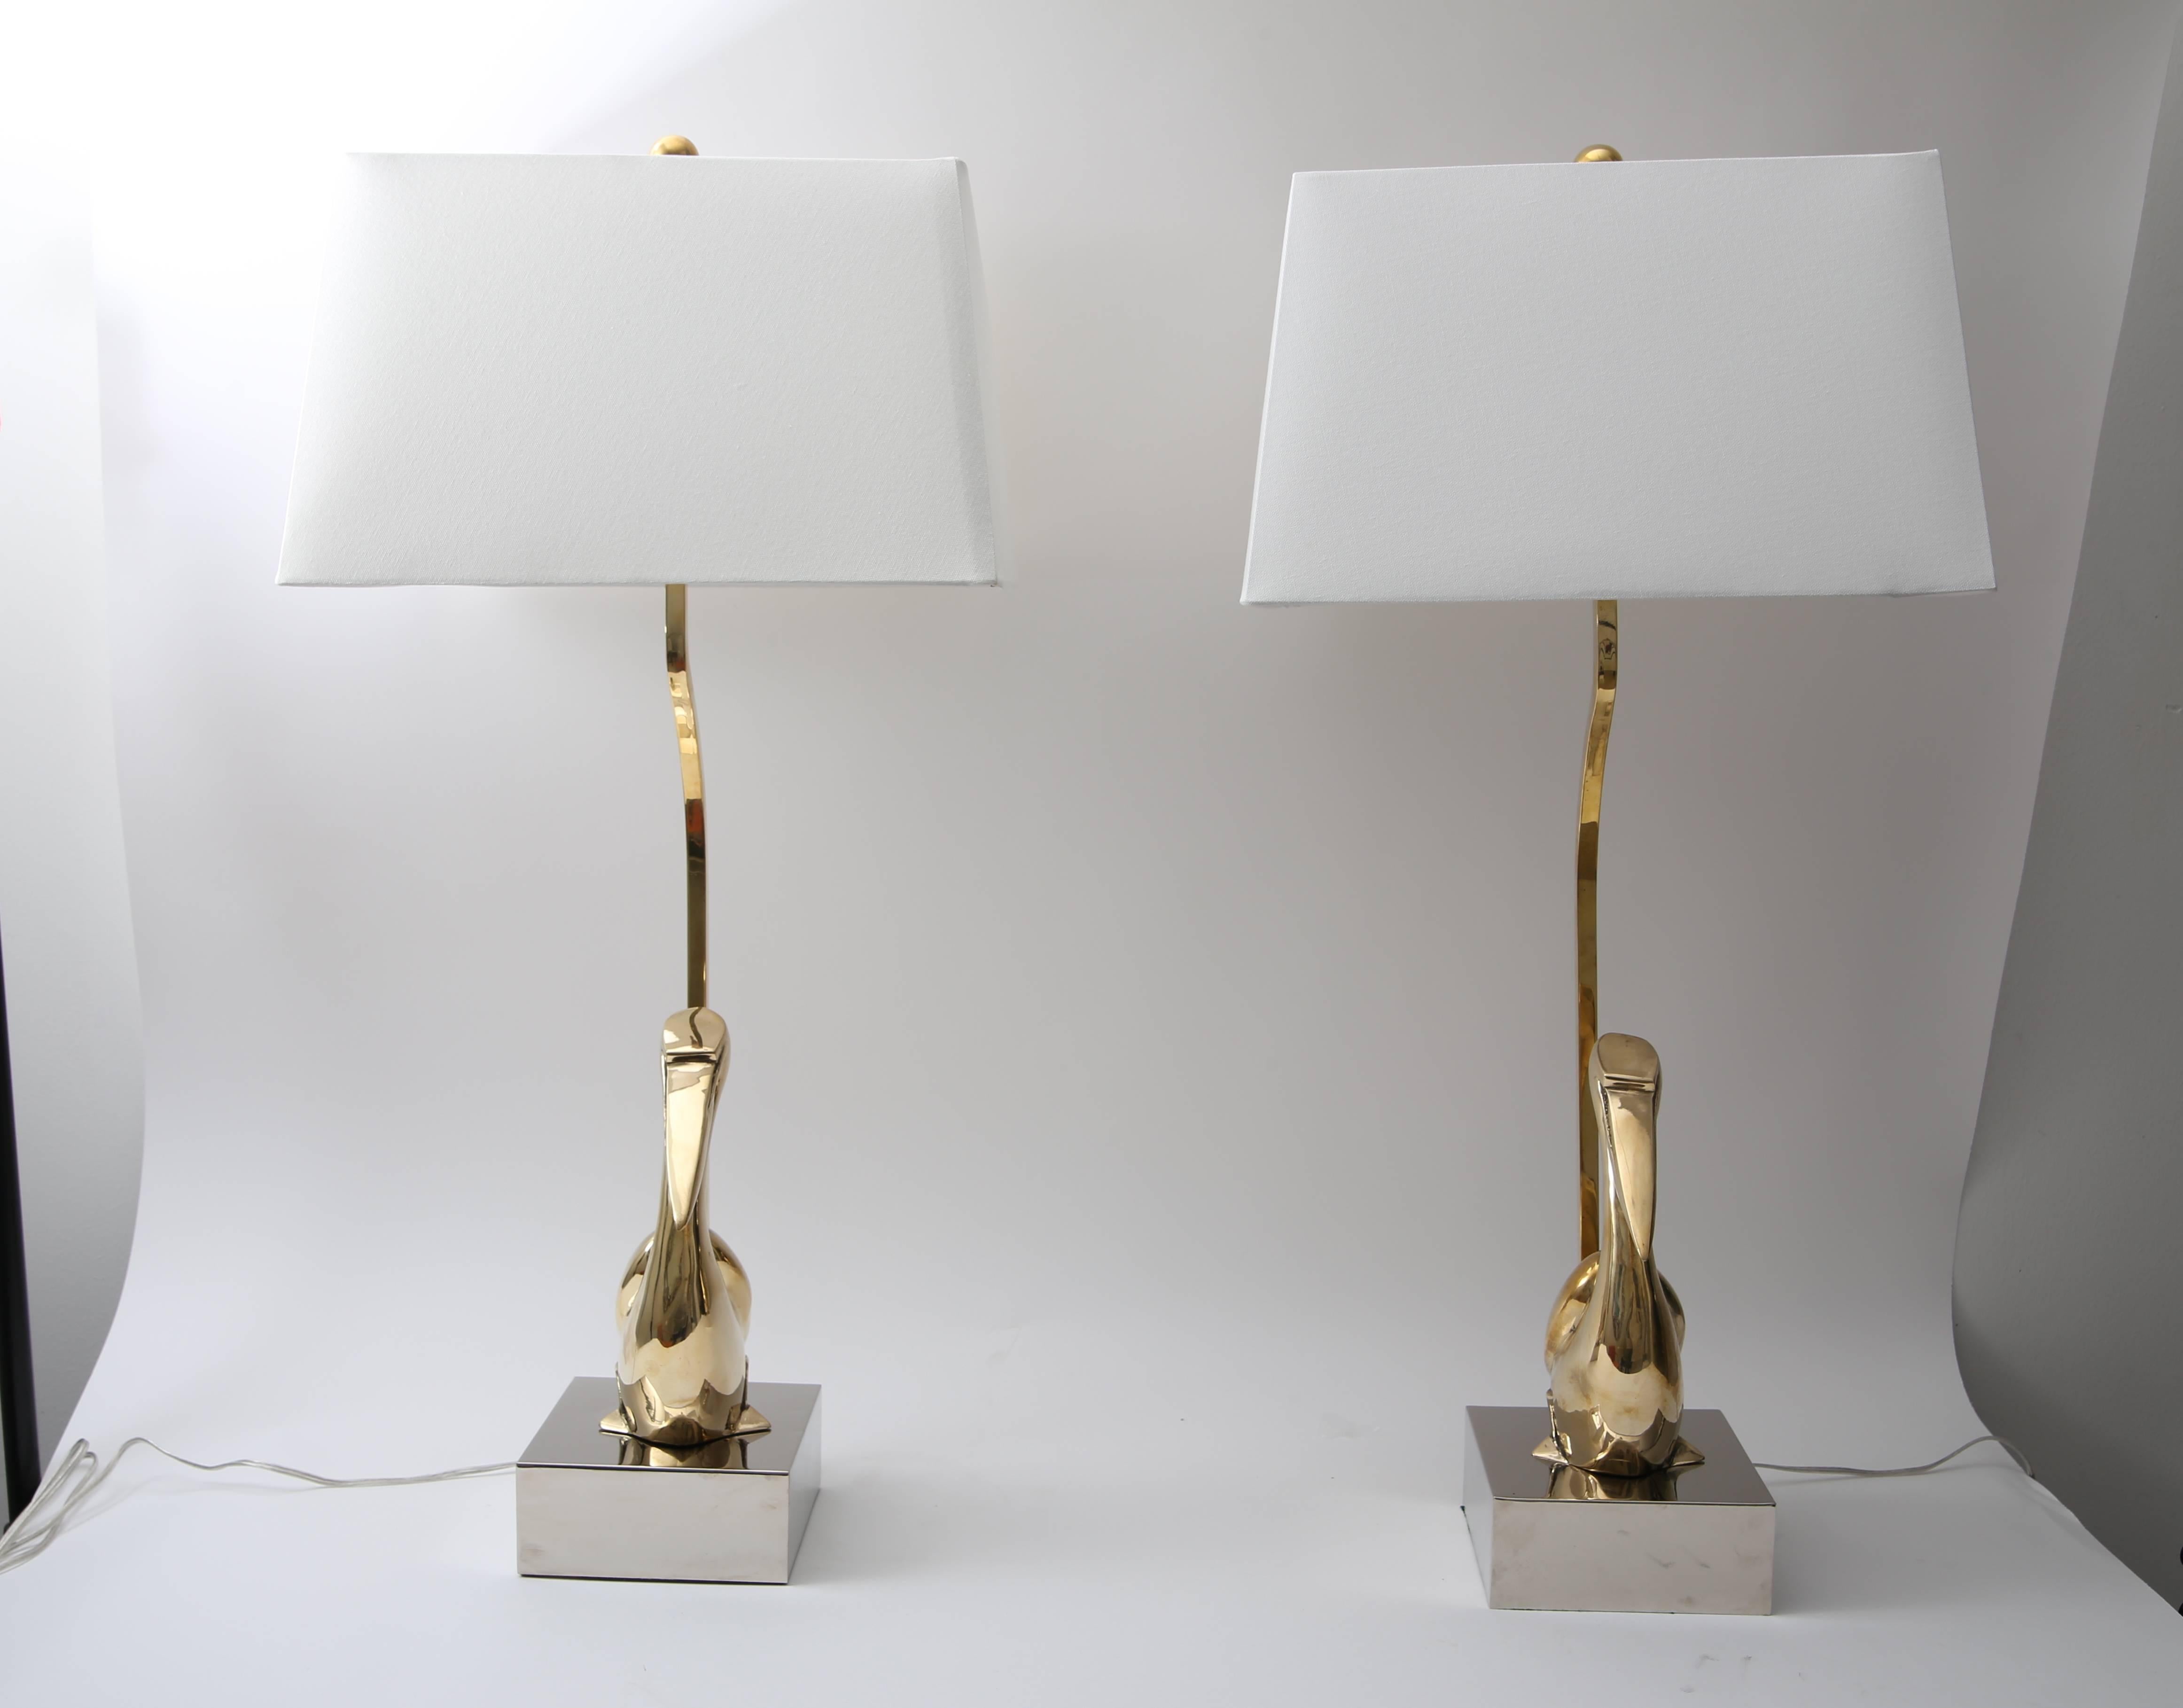 This stylish set of table lamps are very much in the Art Deco style with their clean lines and angular form of the stylized pelicans. The pieces have been professionally polished and lacquered (no polishing or tarnish).

Note: 34.50